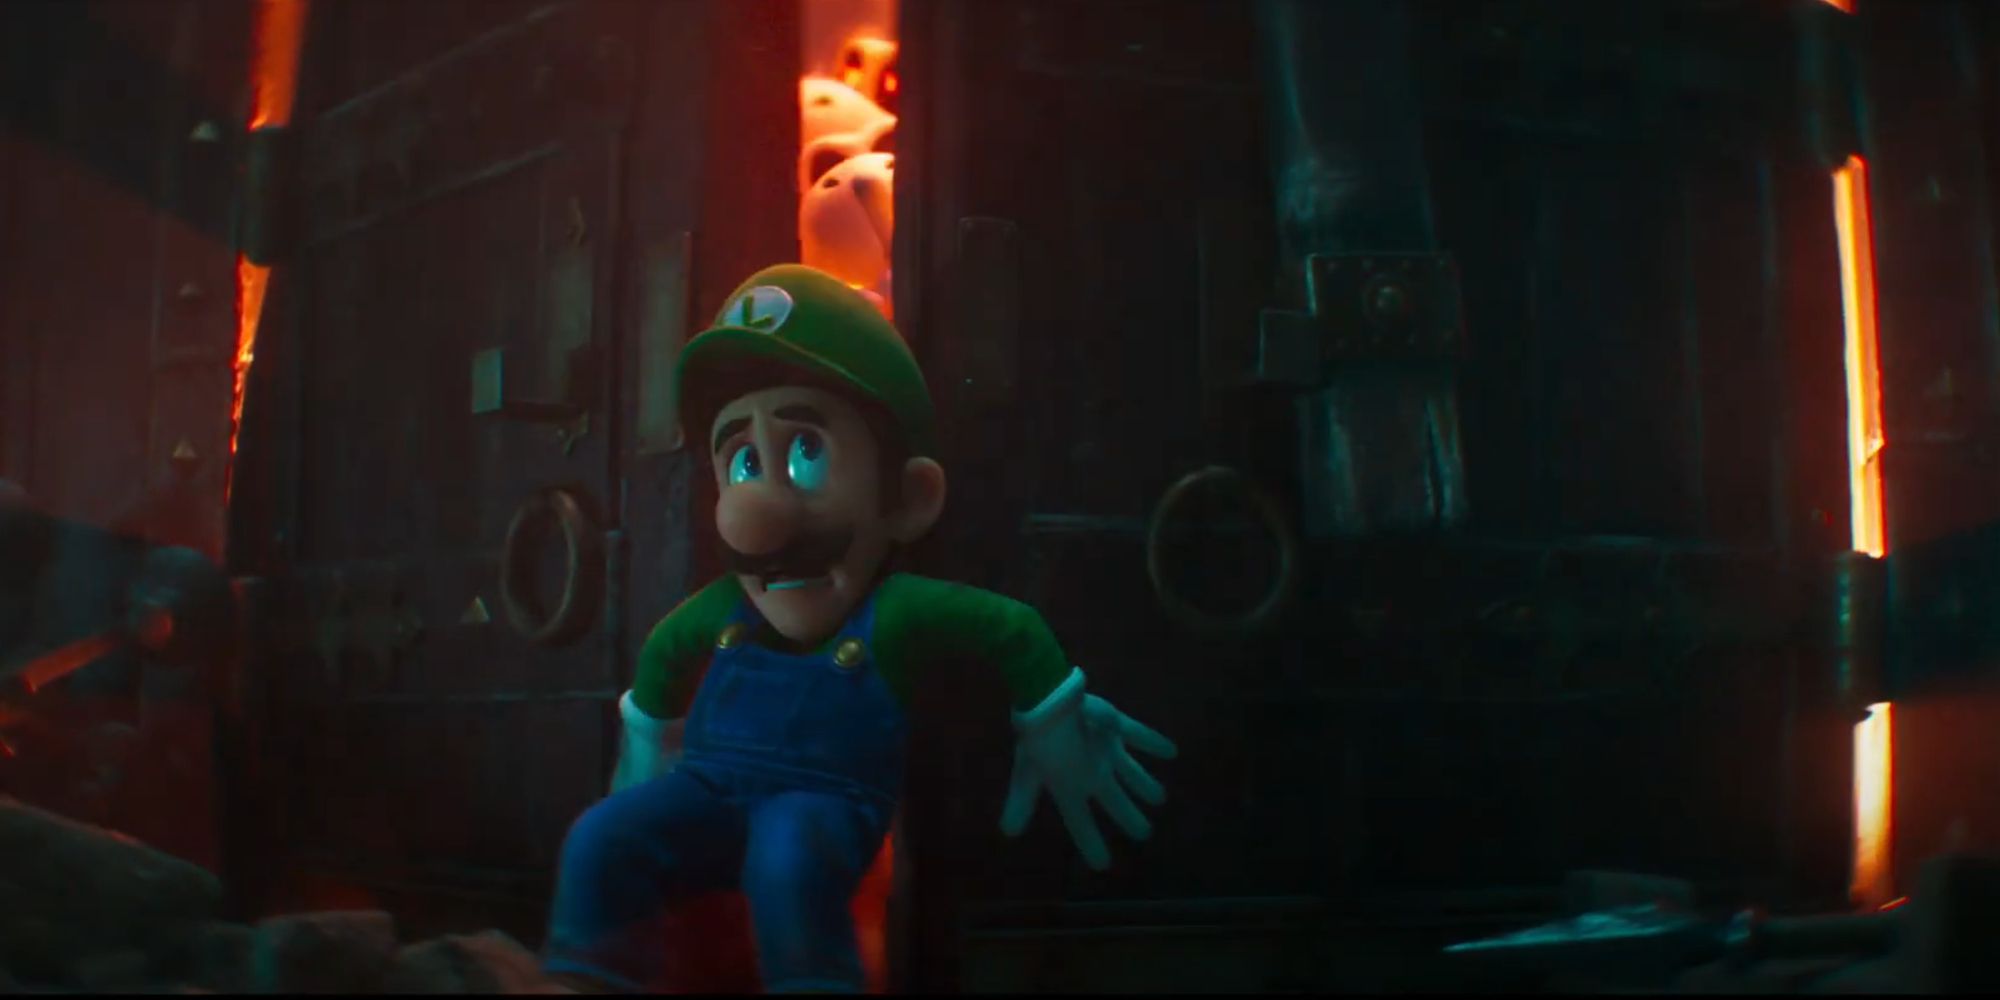 luigi trying to hold a castle door closed in the mario movie